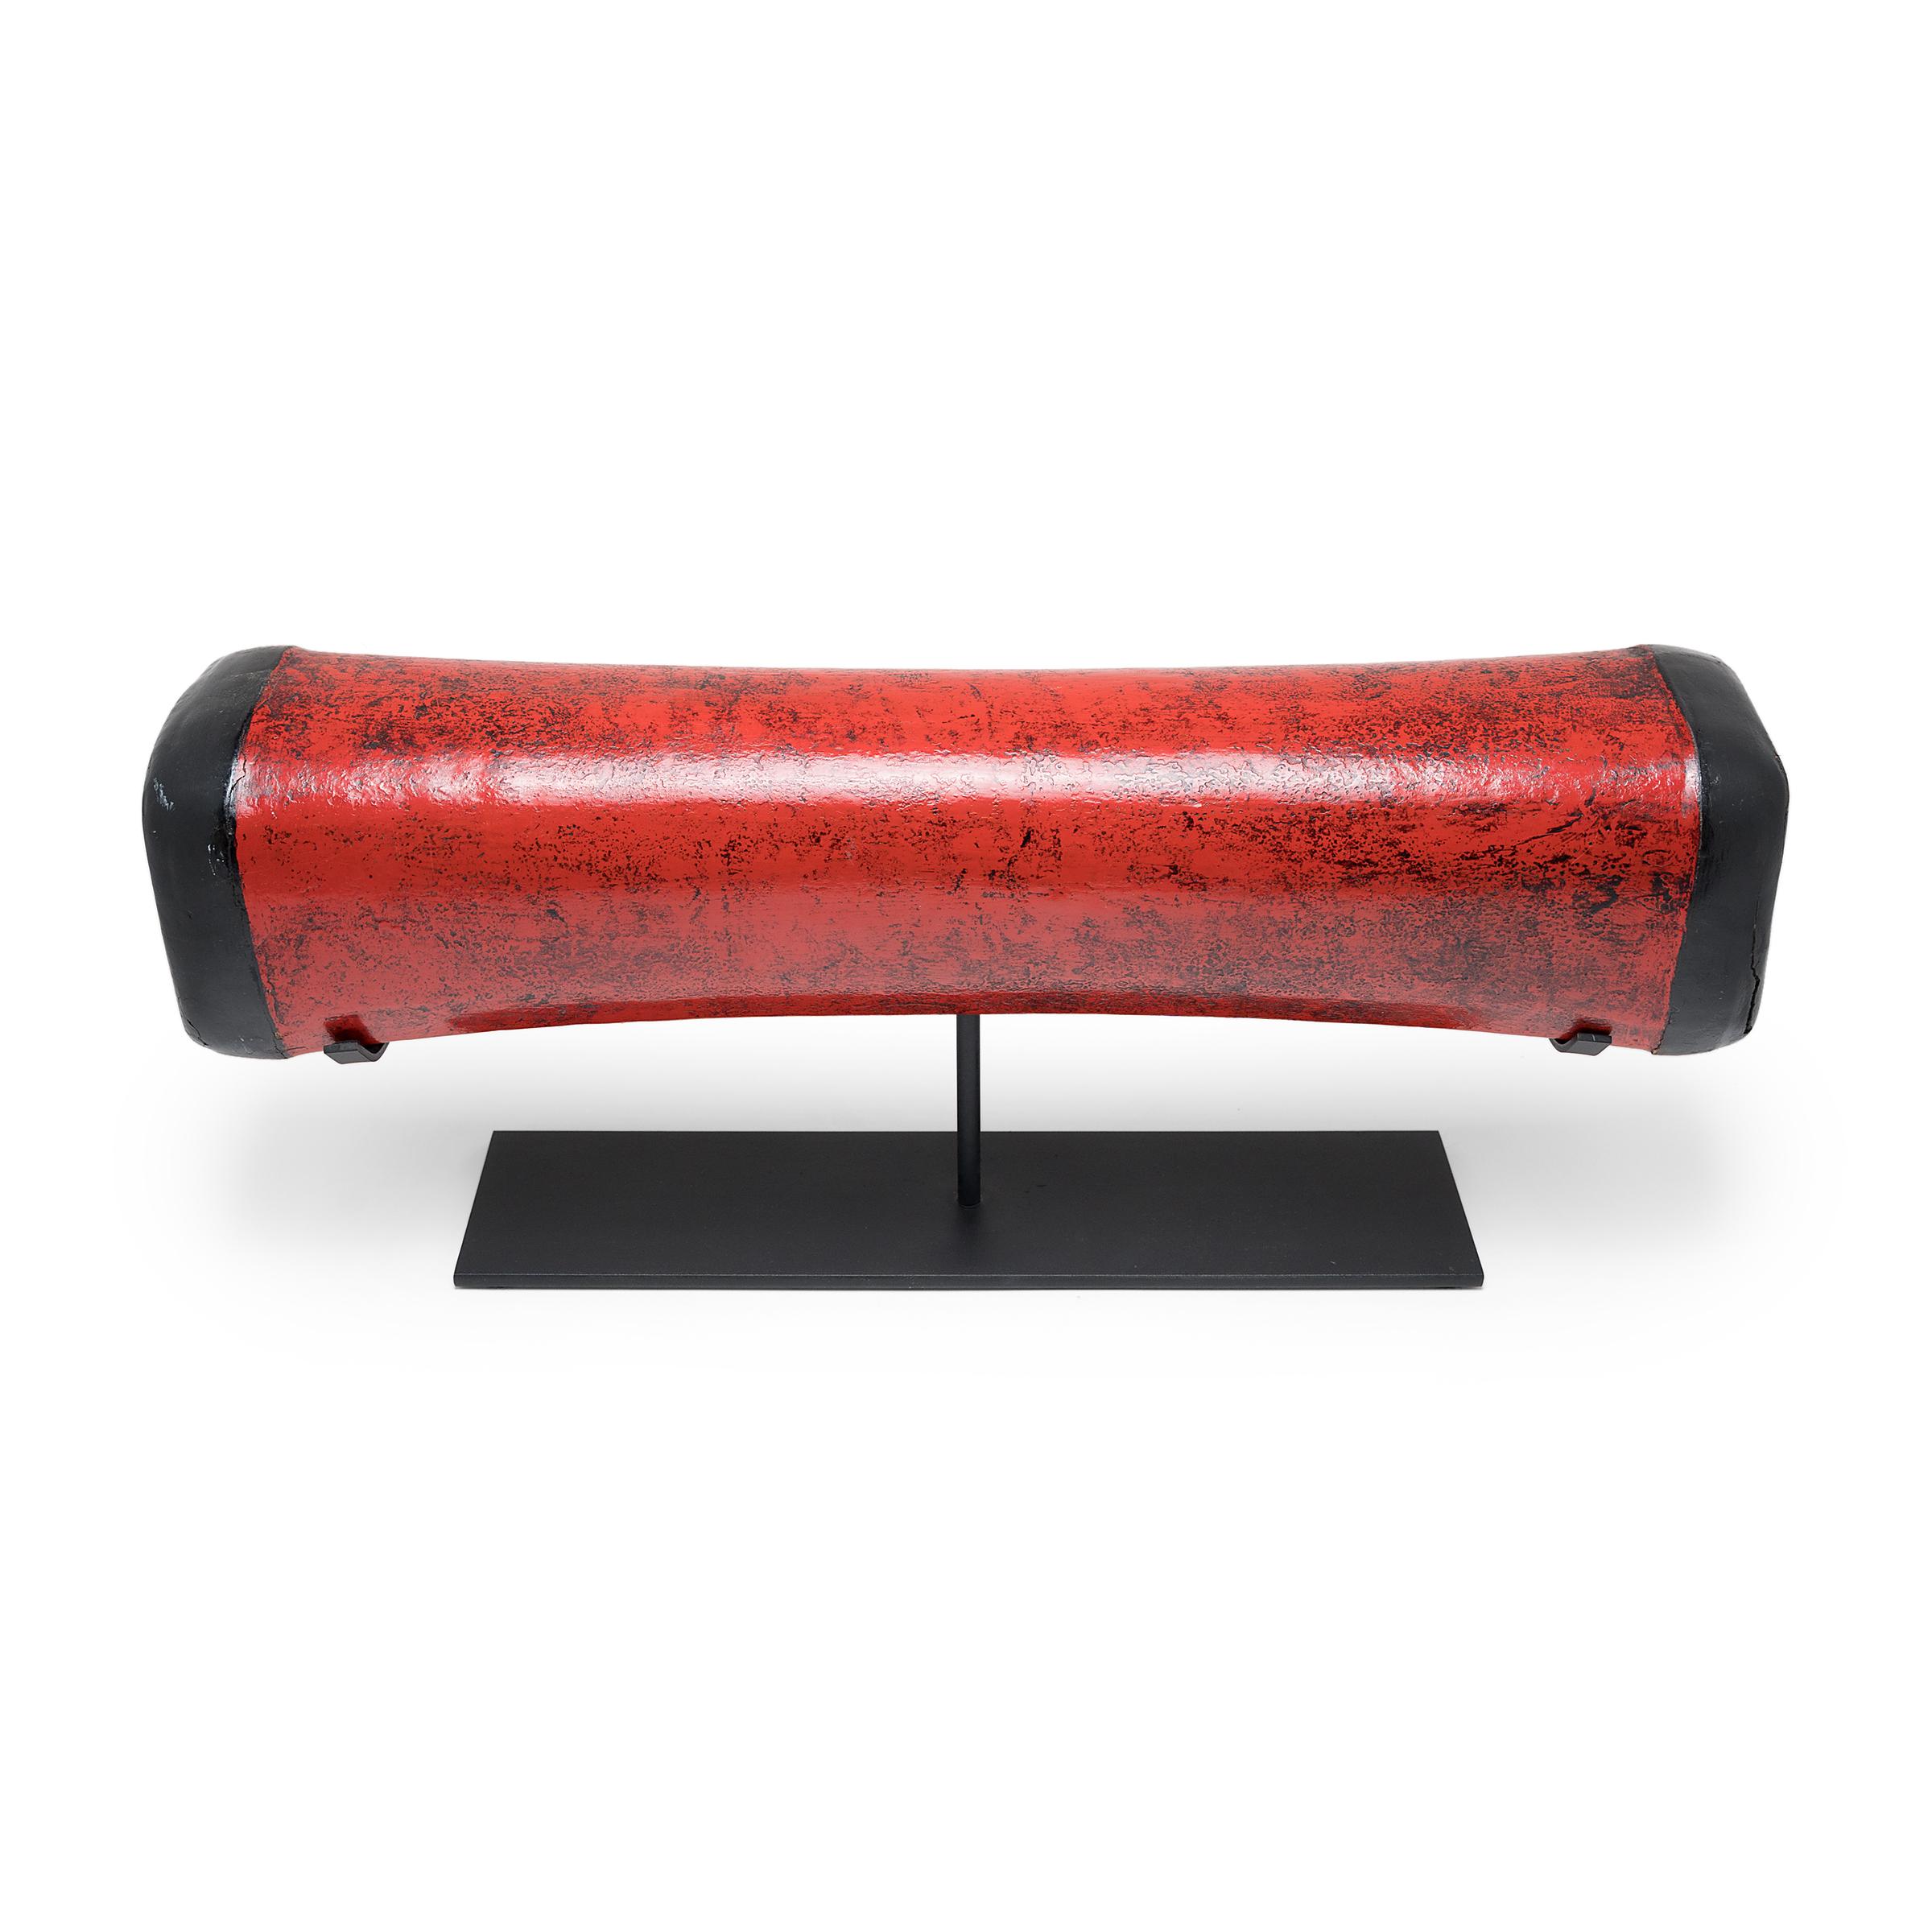 Dated to the late 19th century, this extraordinary Chinese headrest is hand-crafted of lacquered hide atop an elongated bamboo frame. Used while sleeping like a modern pillow, the headrest has a pliable design that enabled contour comfort - quite